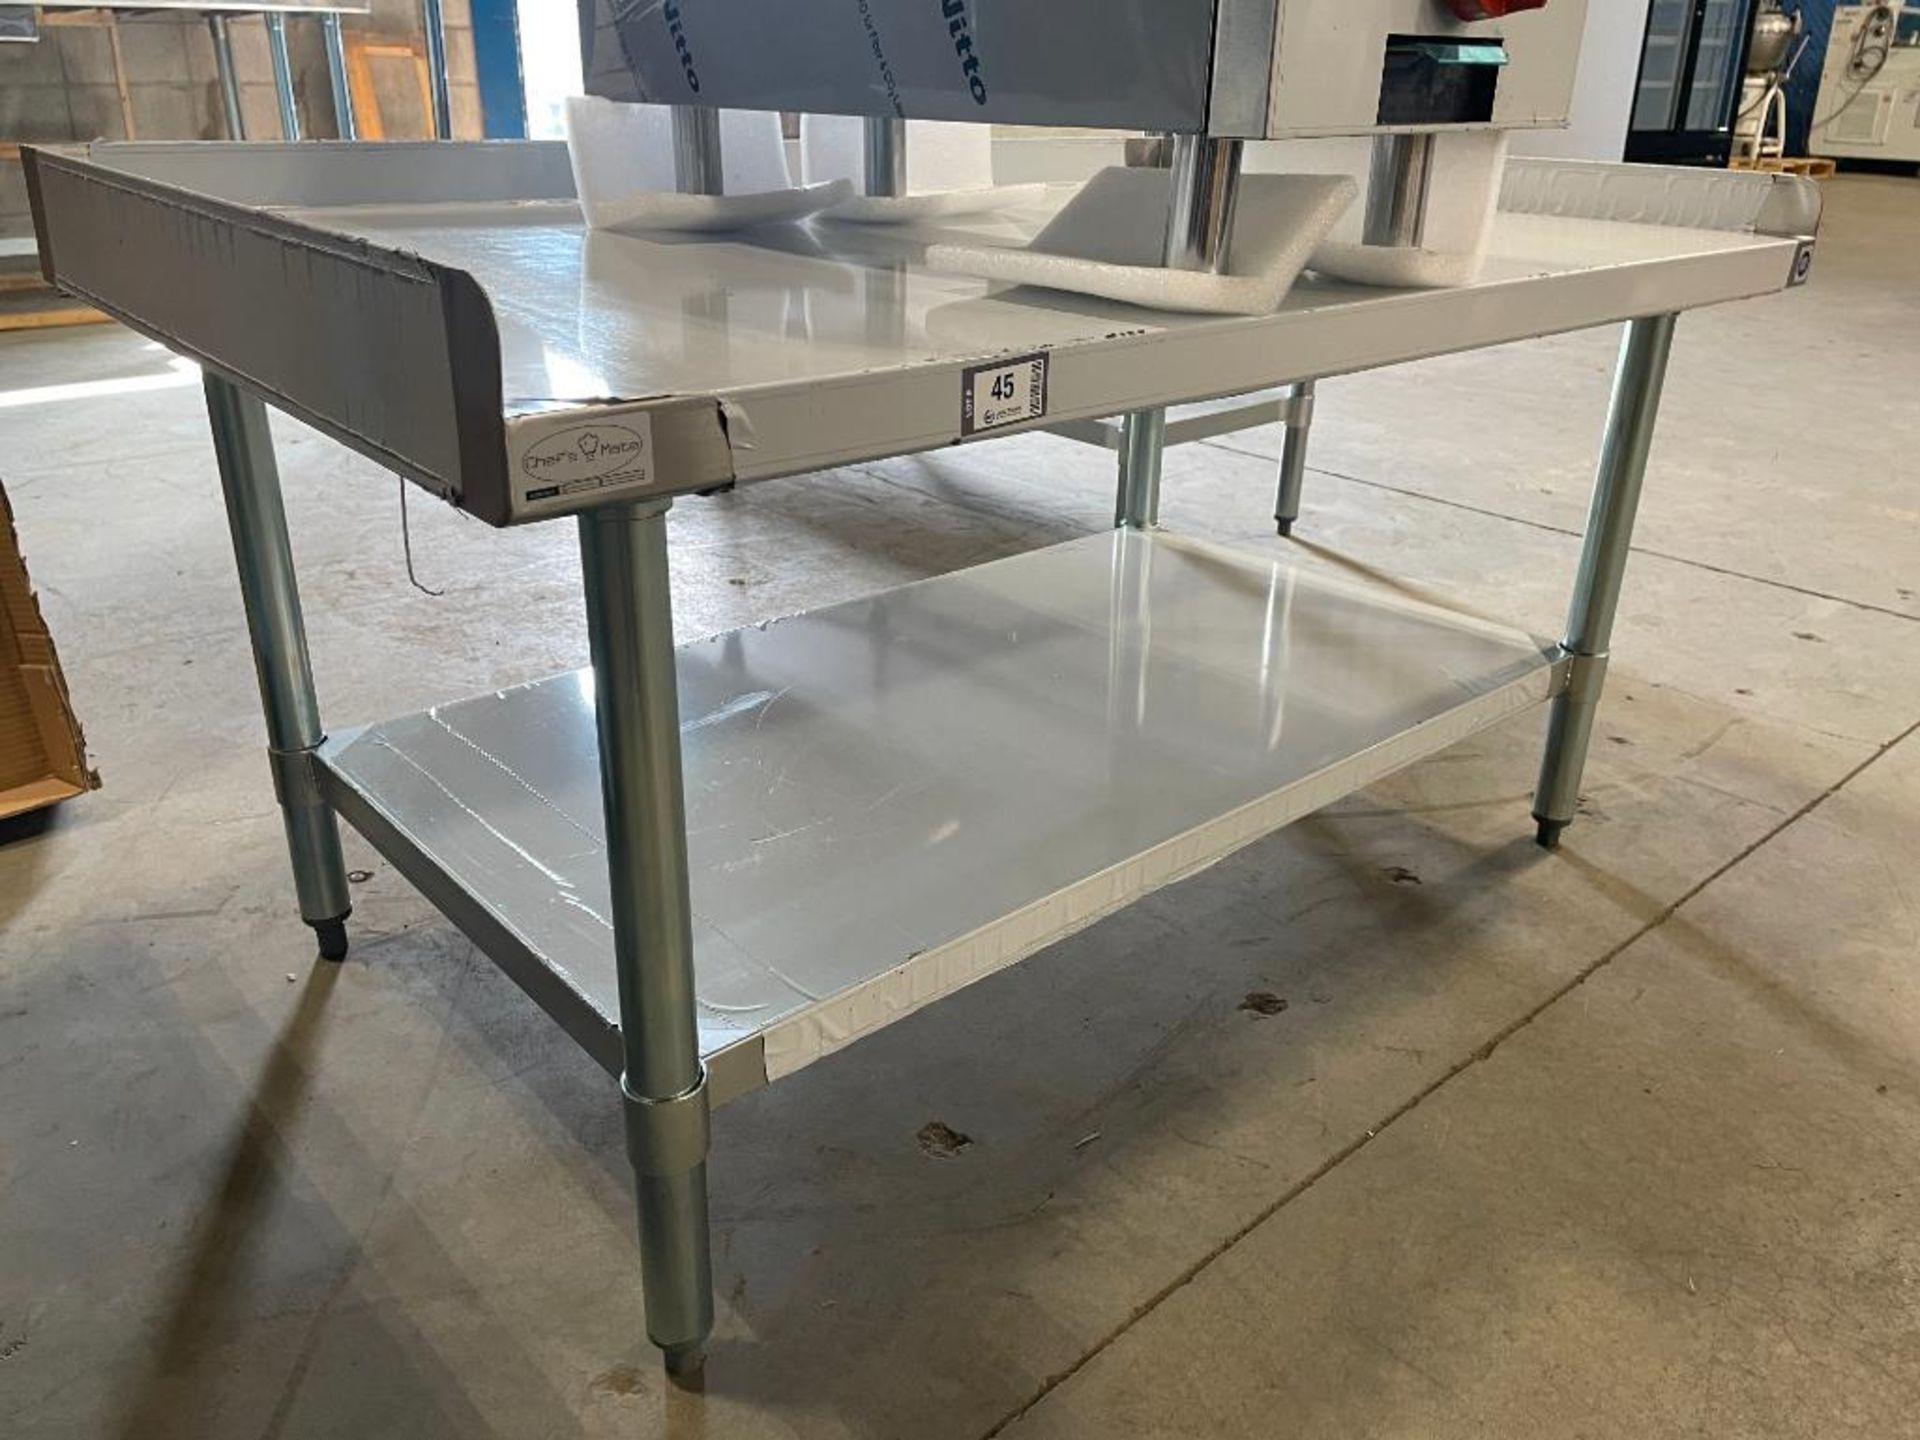 CHEF'S MATE 30" X 48" STAINLESS STEEL EQUIPMENT STAND - NEW - Image 3 of 10